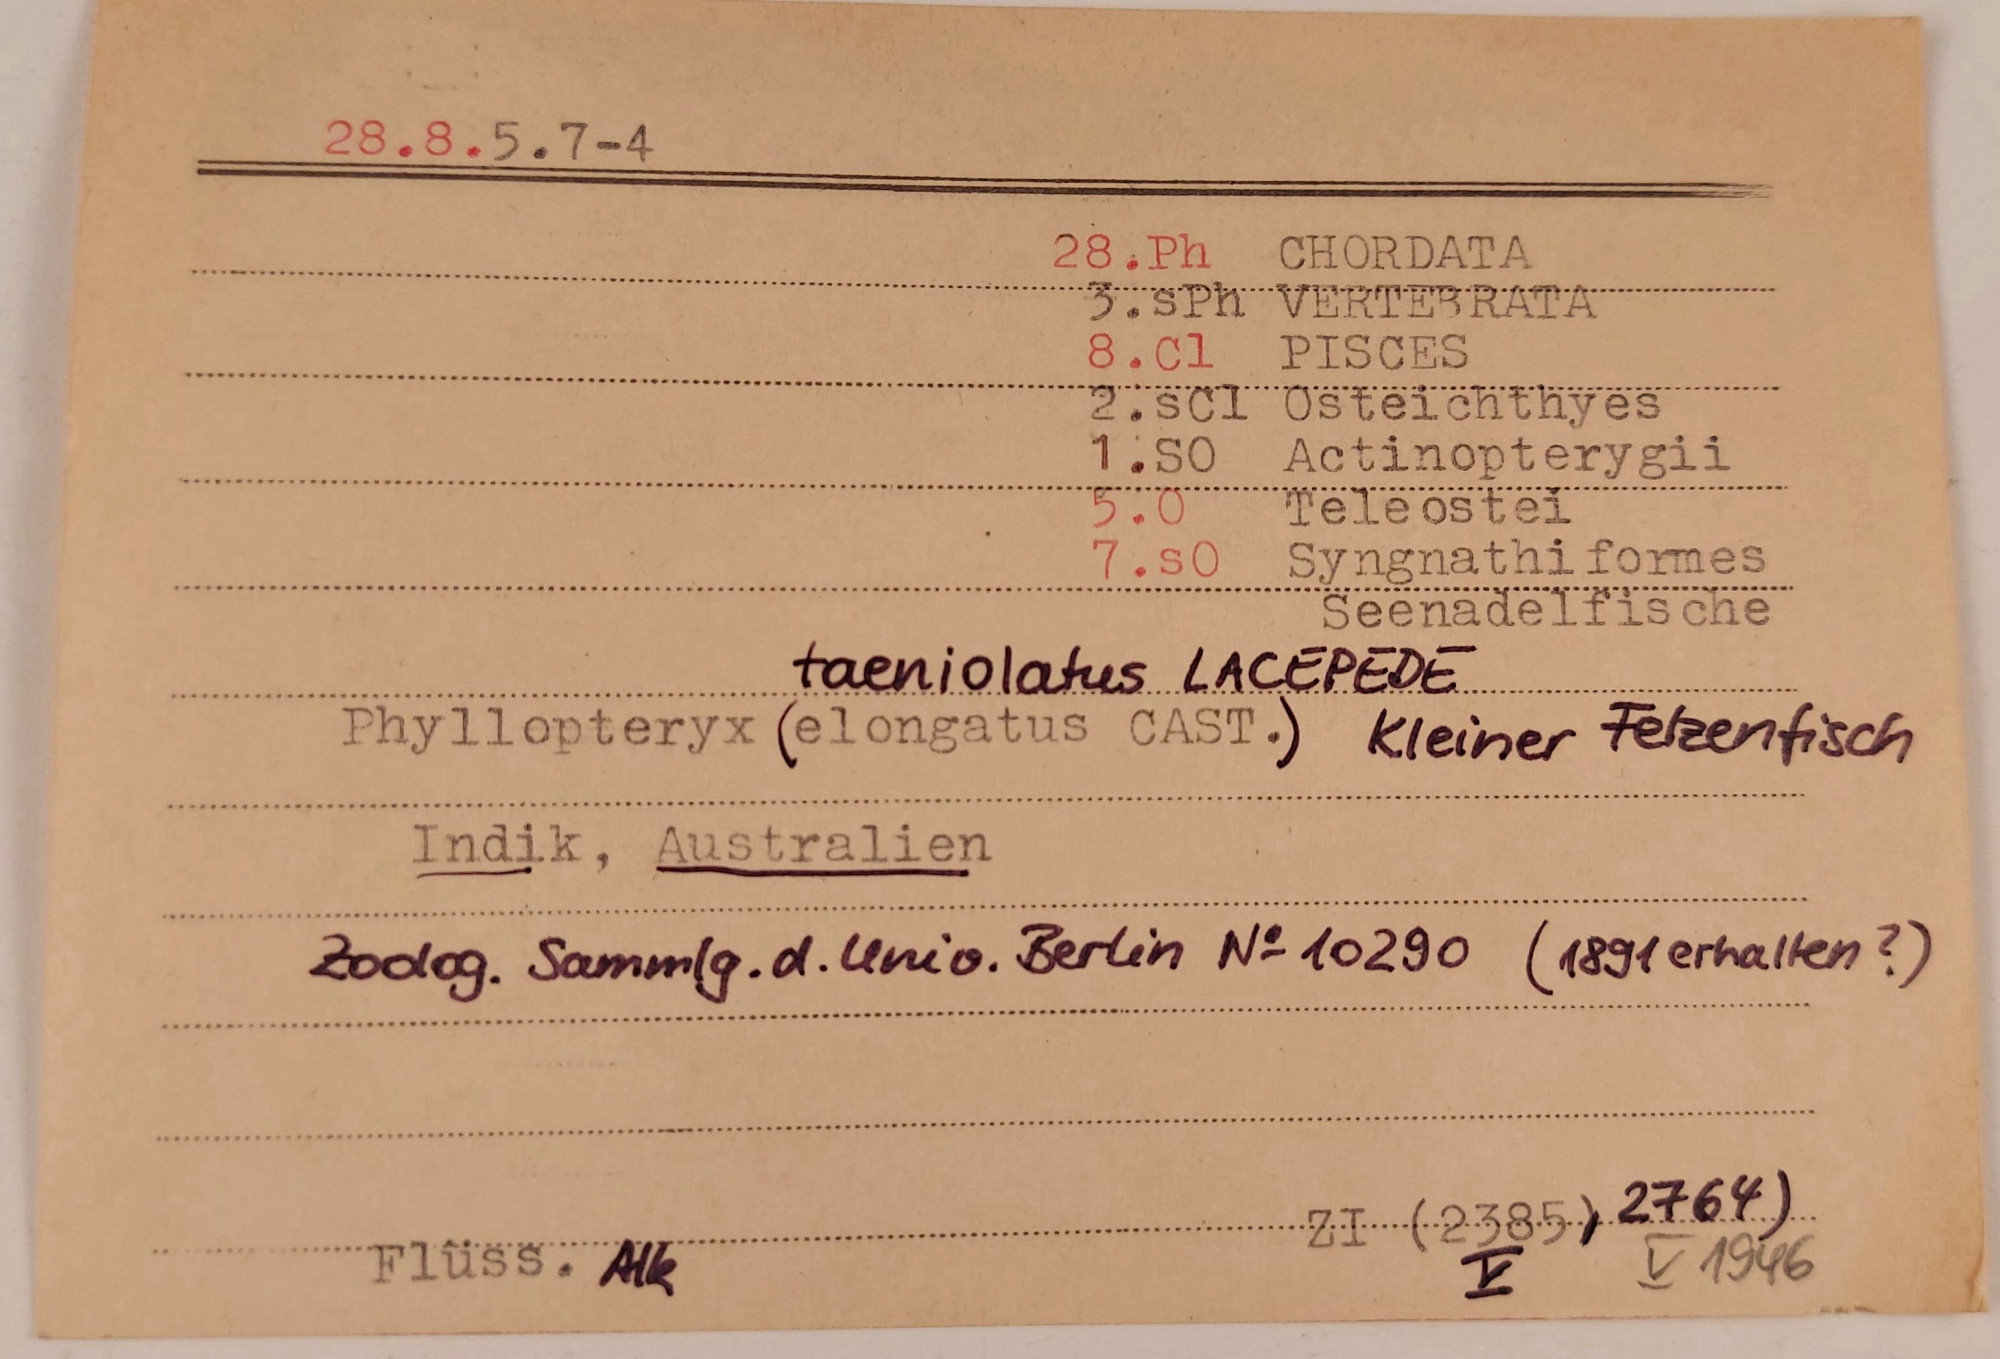 A slightly yellowed index card with typewritten and handwritten entries. See below for transcript.